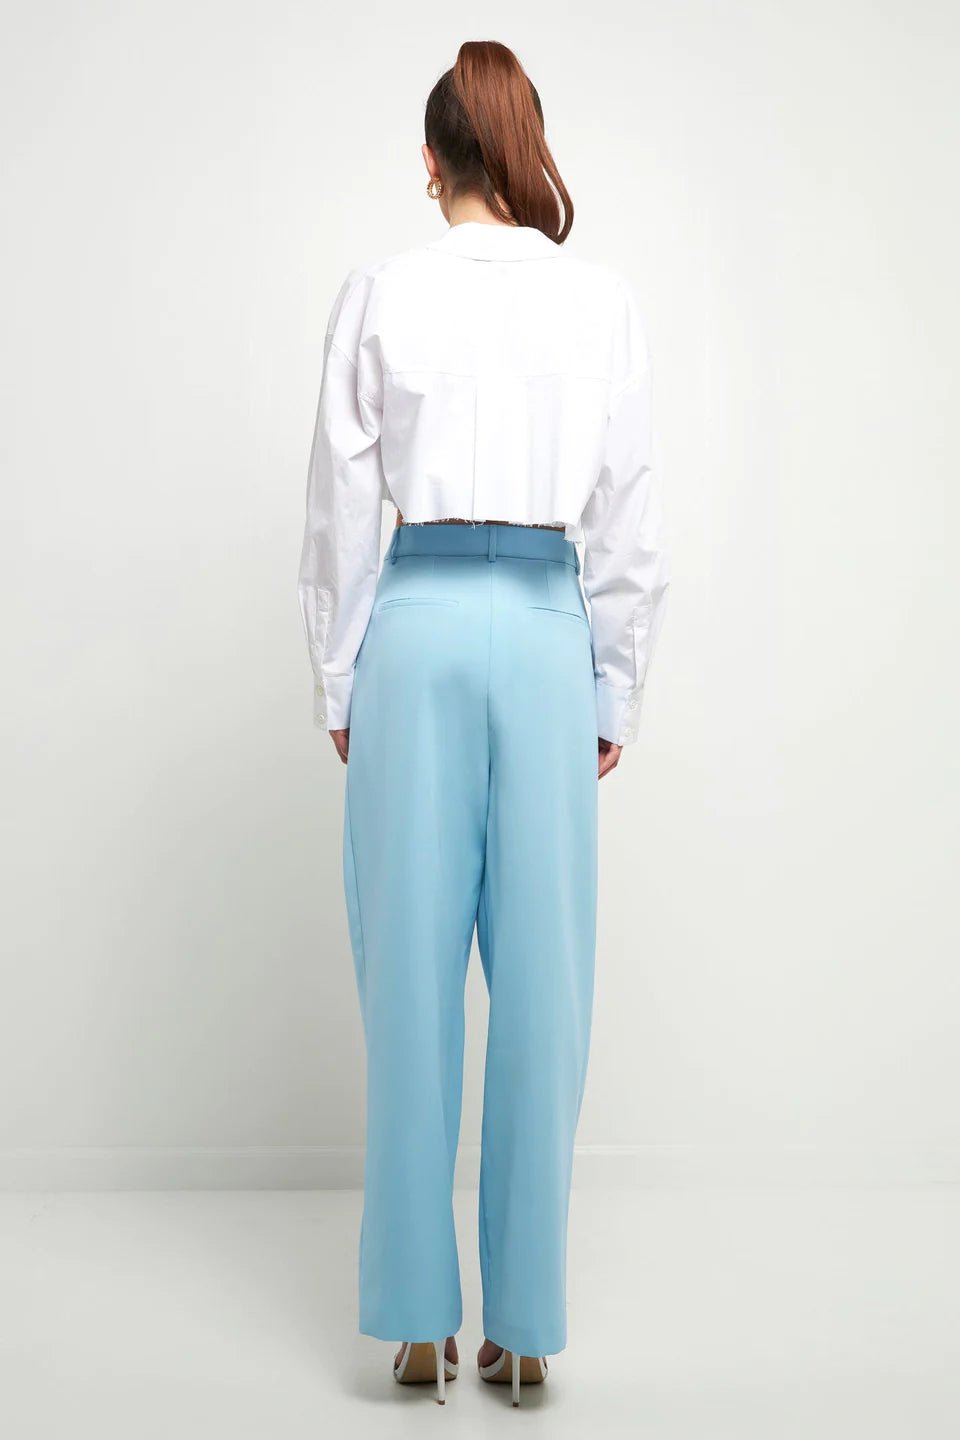 High-Waisted Suit Trousers - Lush Lemon - Women's Clothing - Endless Rose - 192934512466